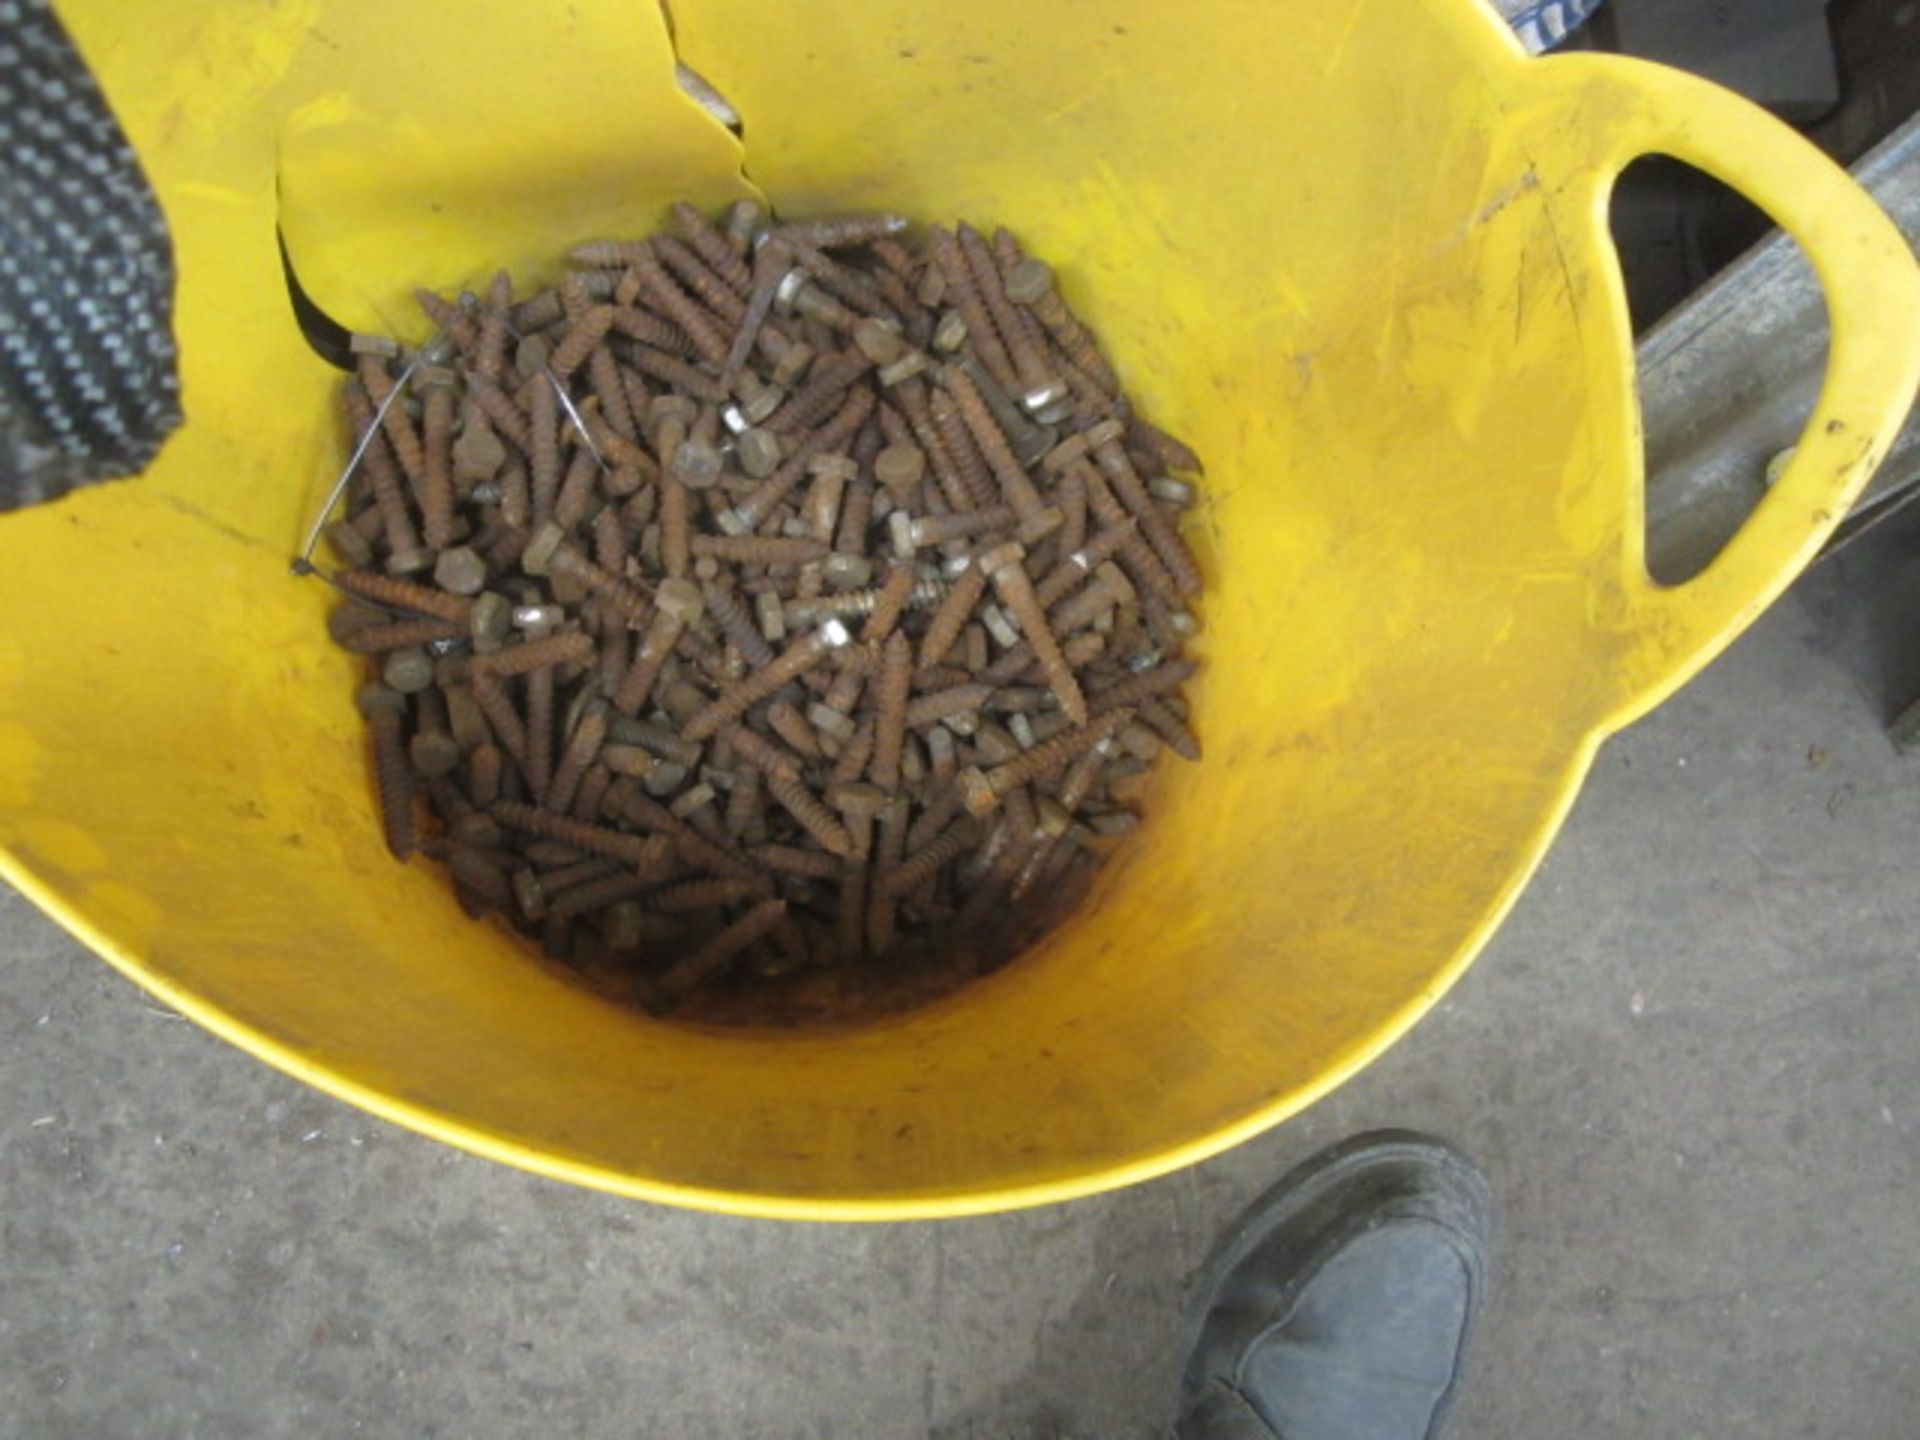 Contents of bay of racking including steel profiles, heavy duty bolts, metal clips etc., as lotted - - Image 12 of 19